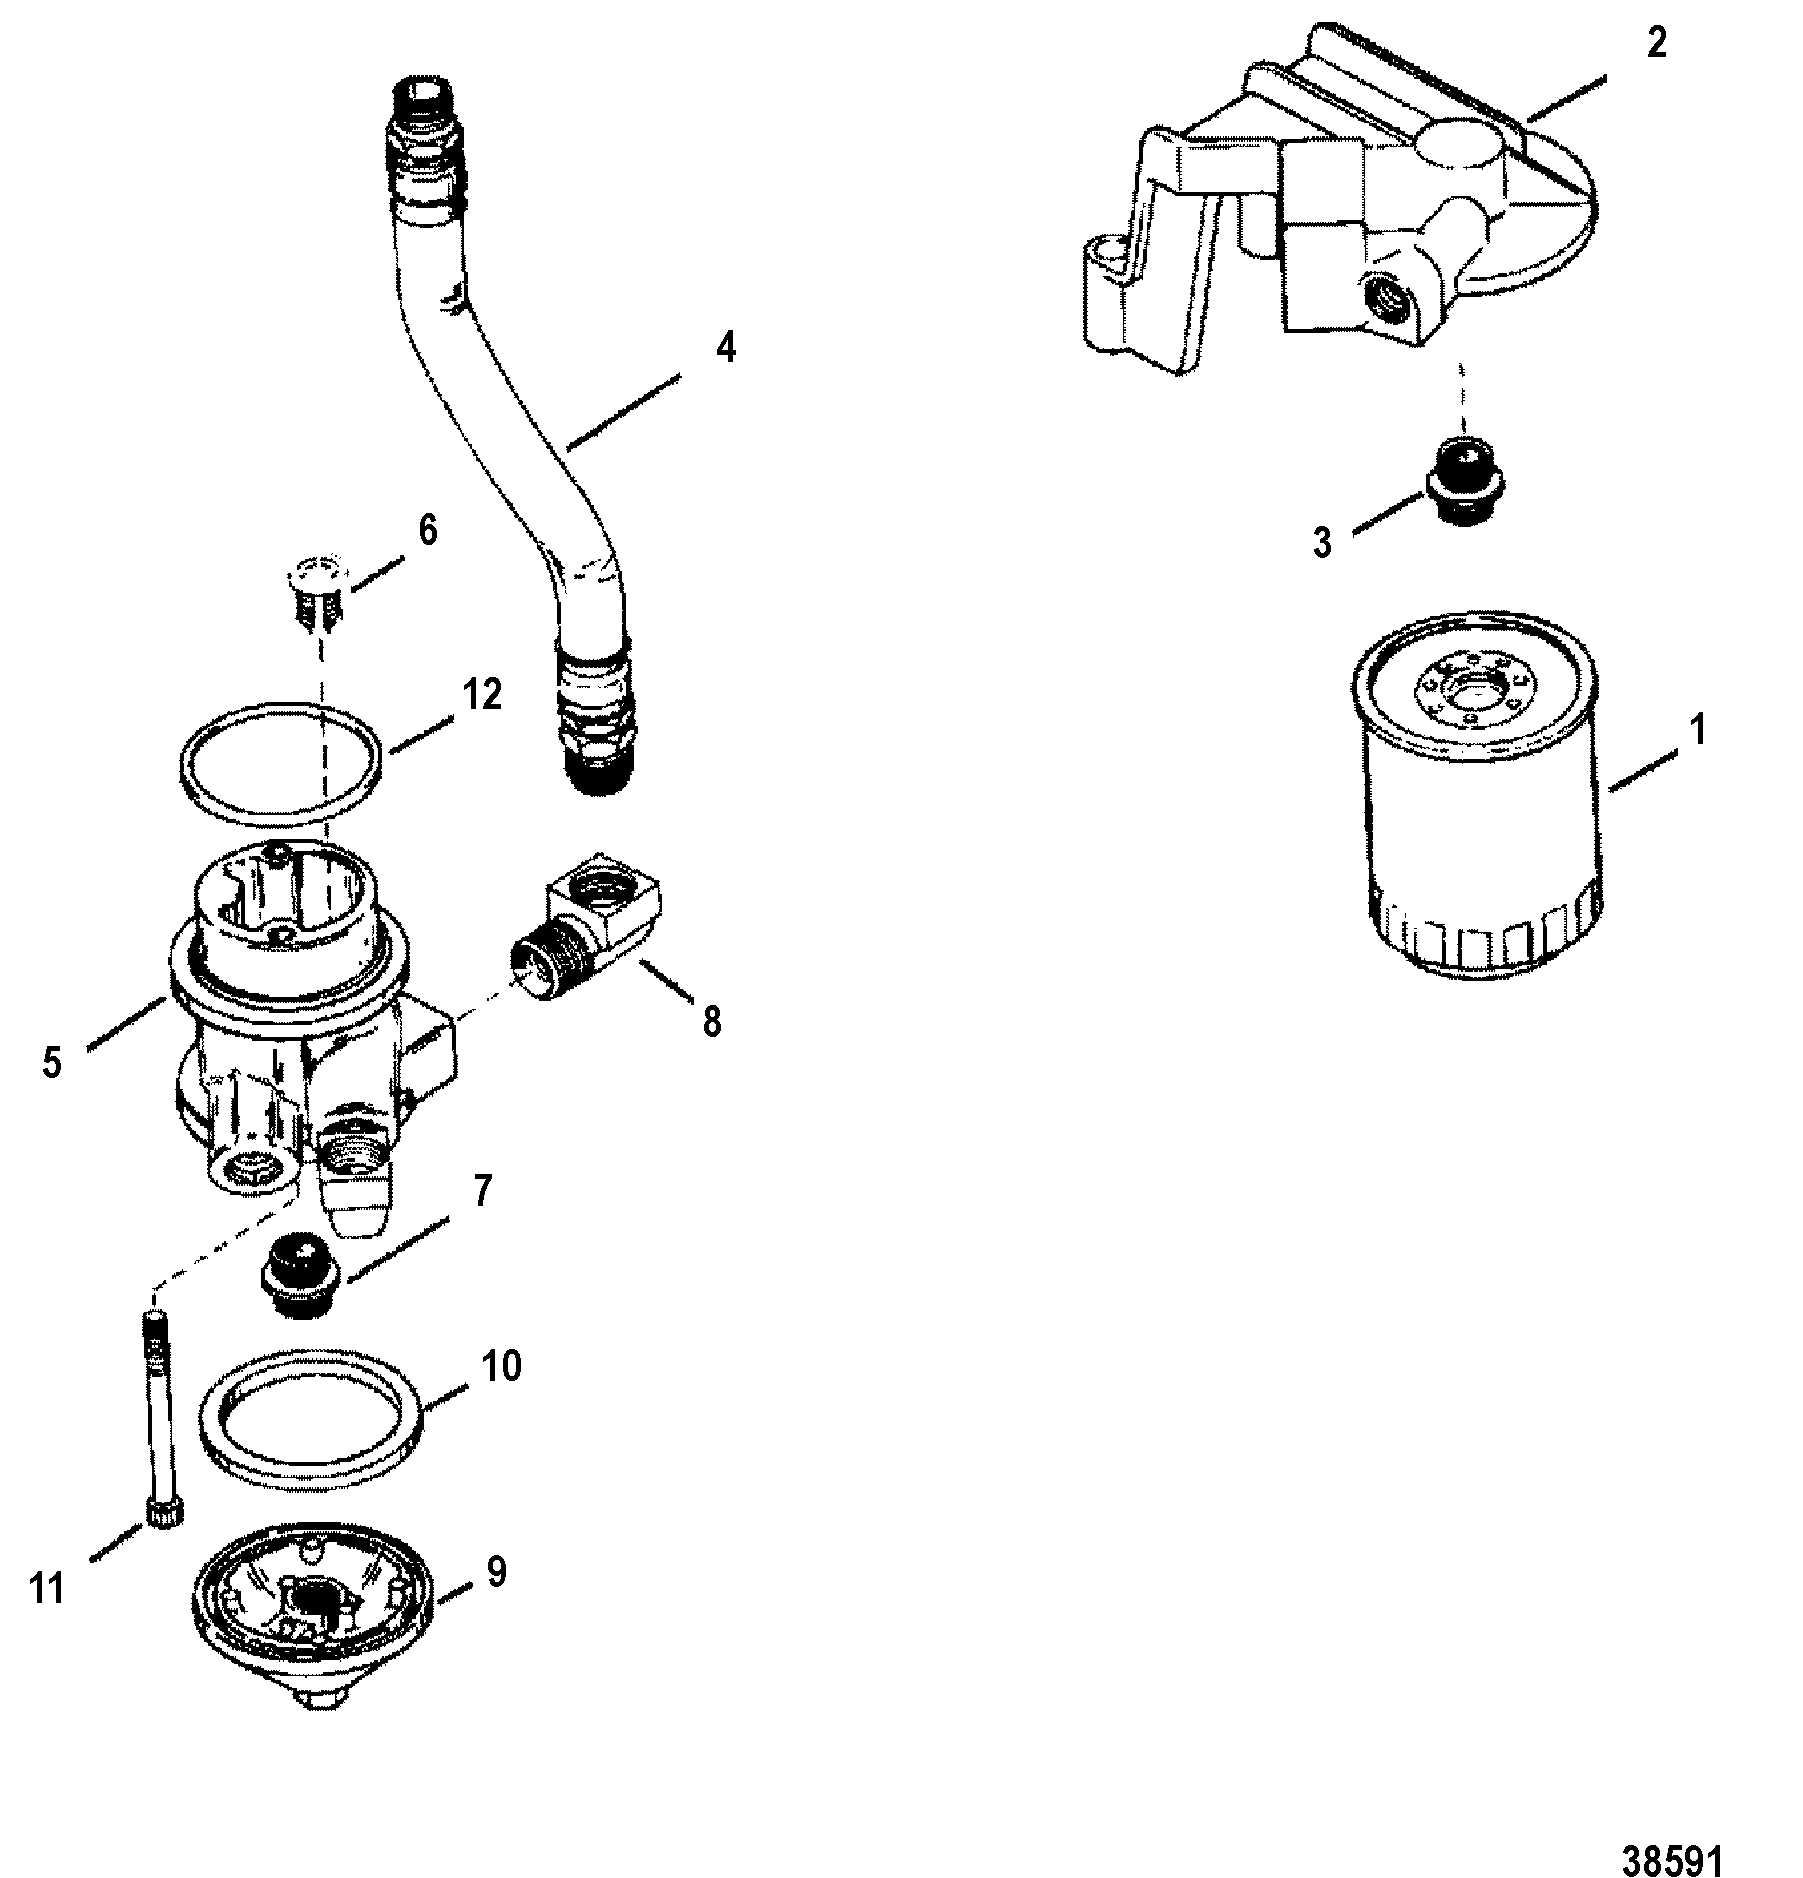 OIL FILTER AND ADAPTOR(S/N-0F114689 and BELOW)